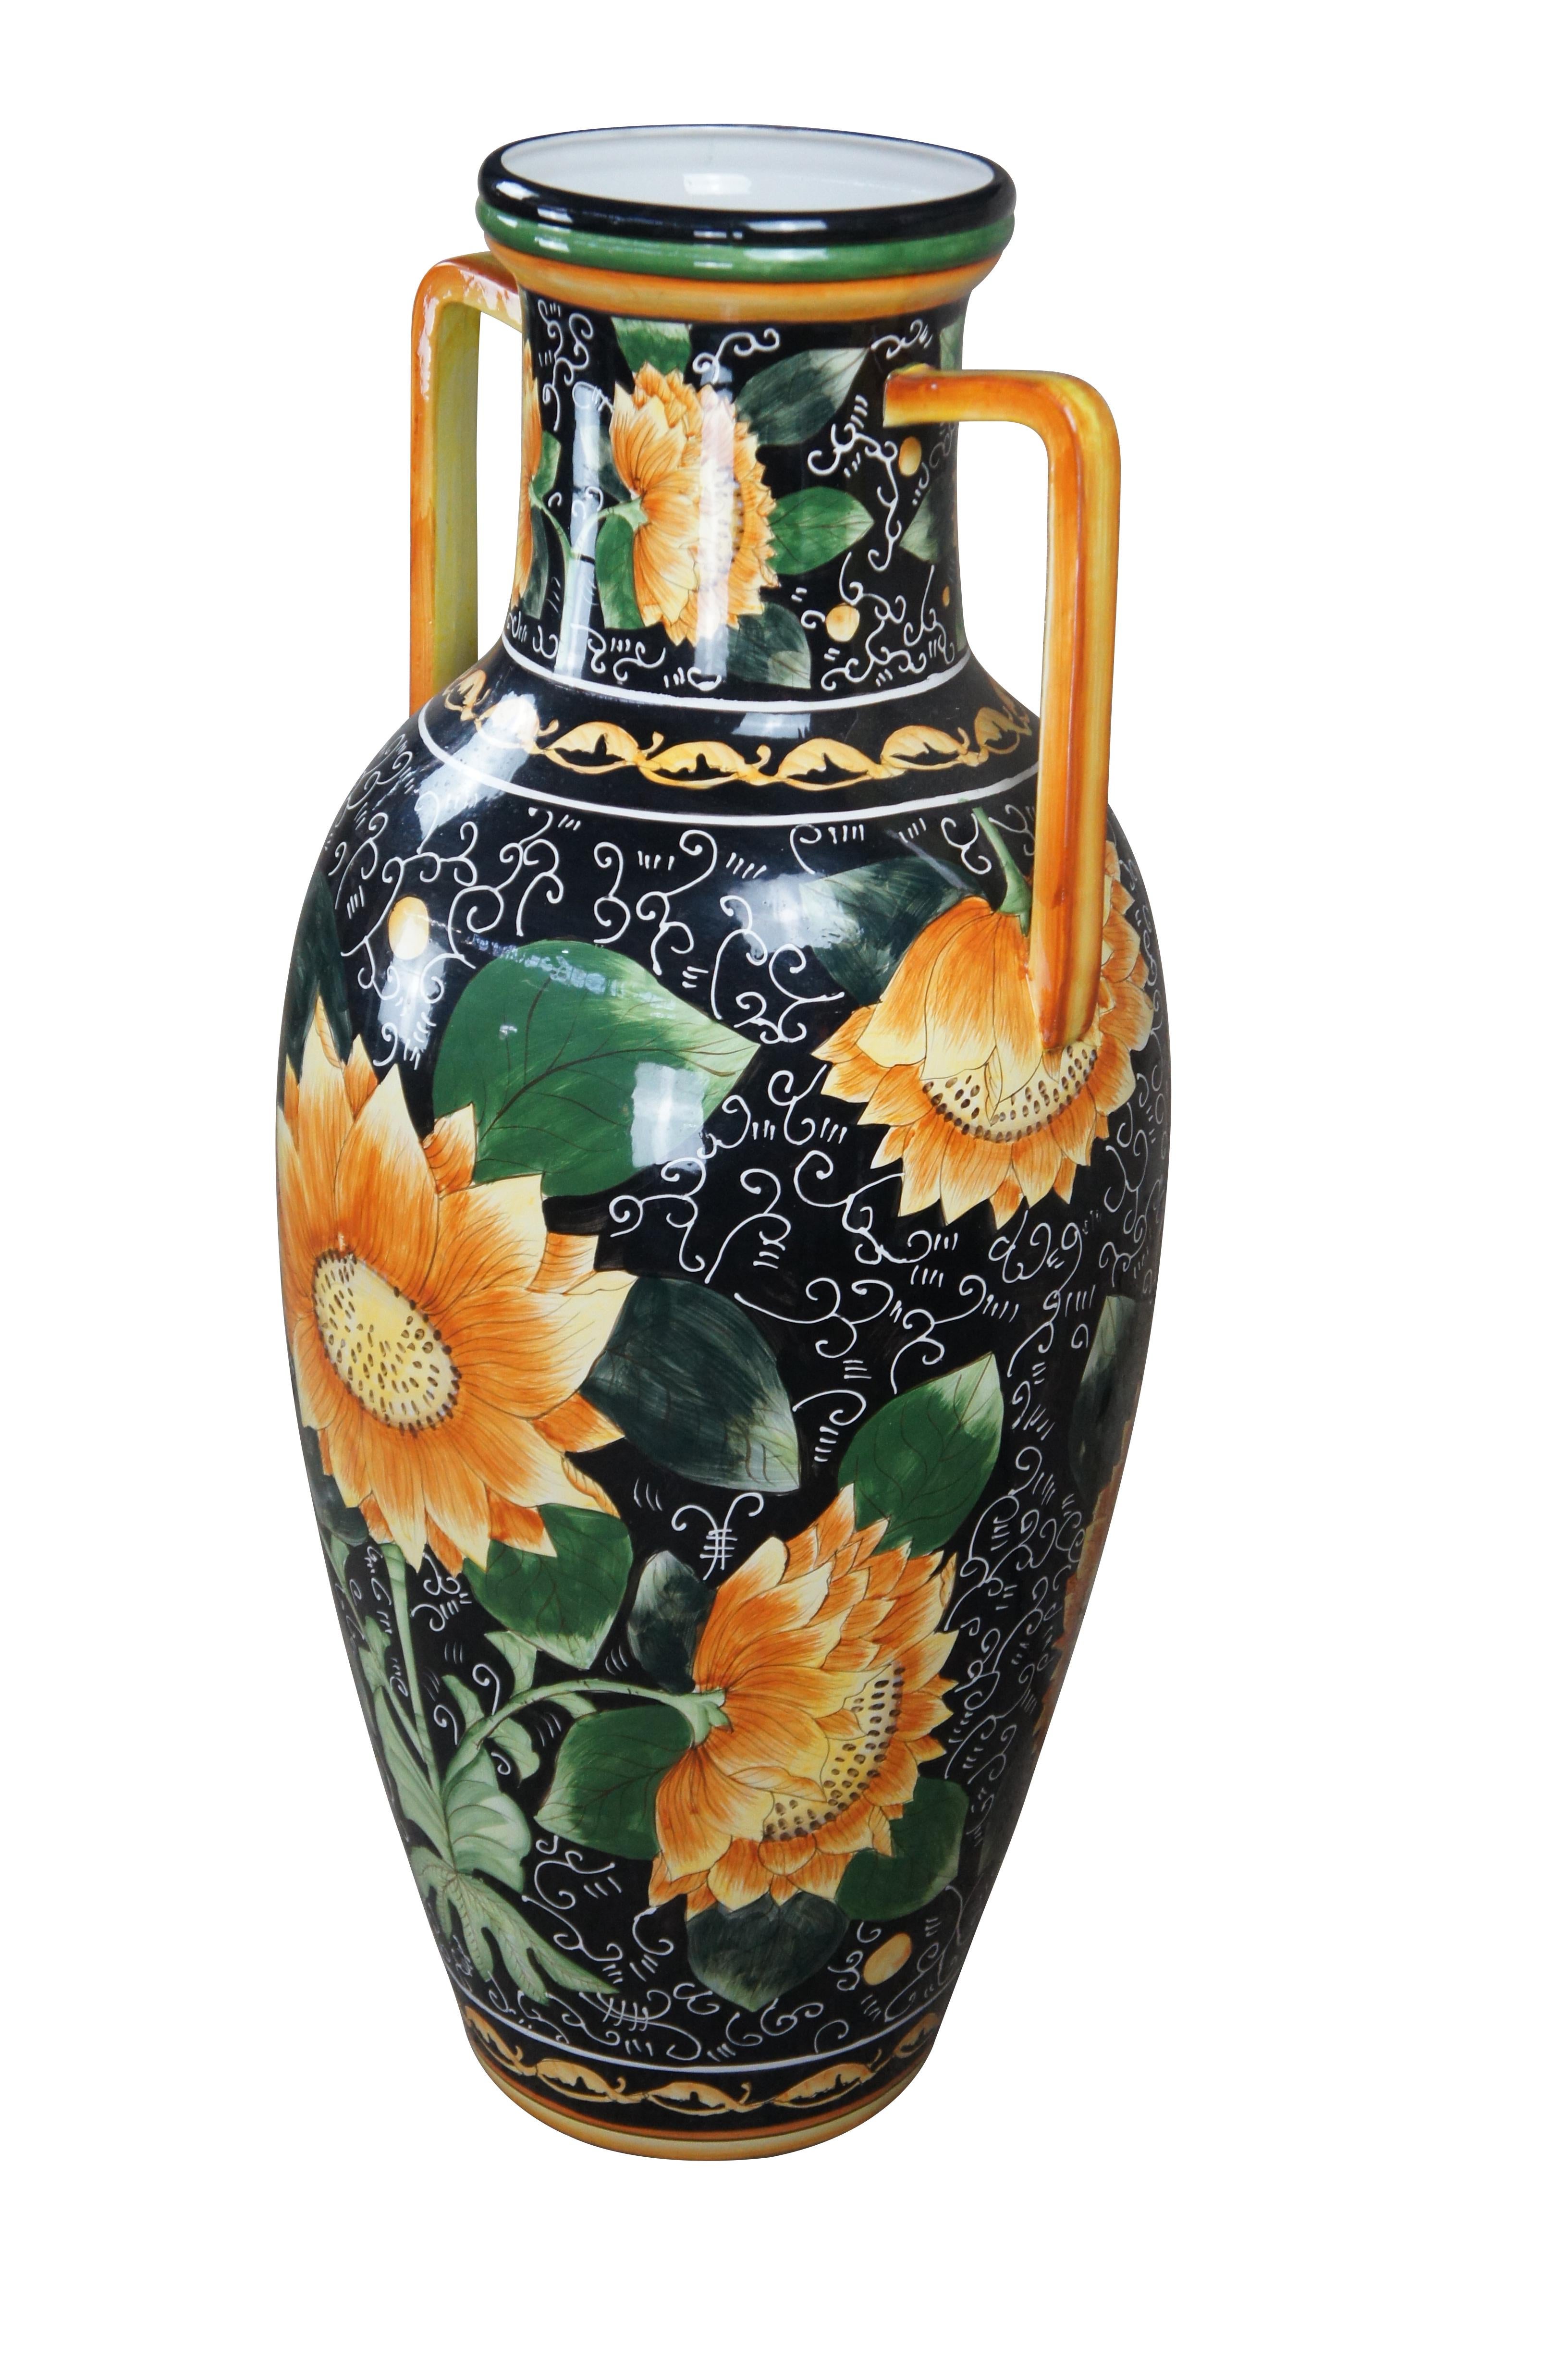 Large vintage Italian style floor vase or urn.  Made of porcelain featuring sunflower design against a black field with large handles. 

Dimensions:
18.5